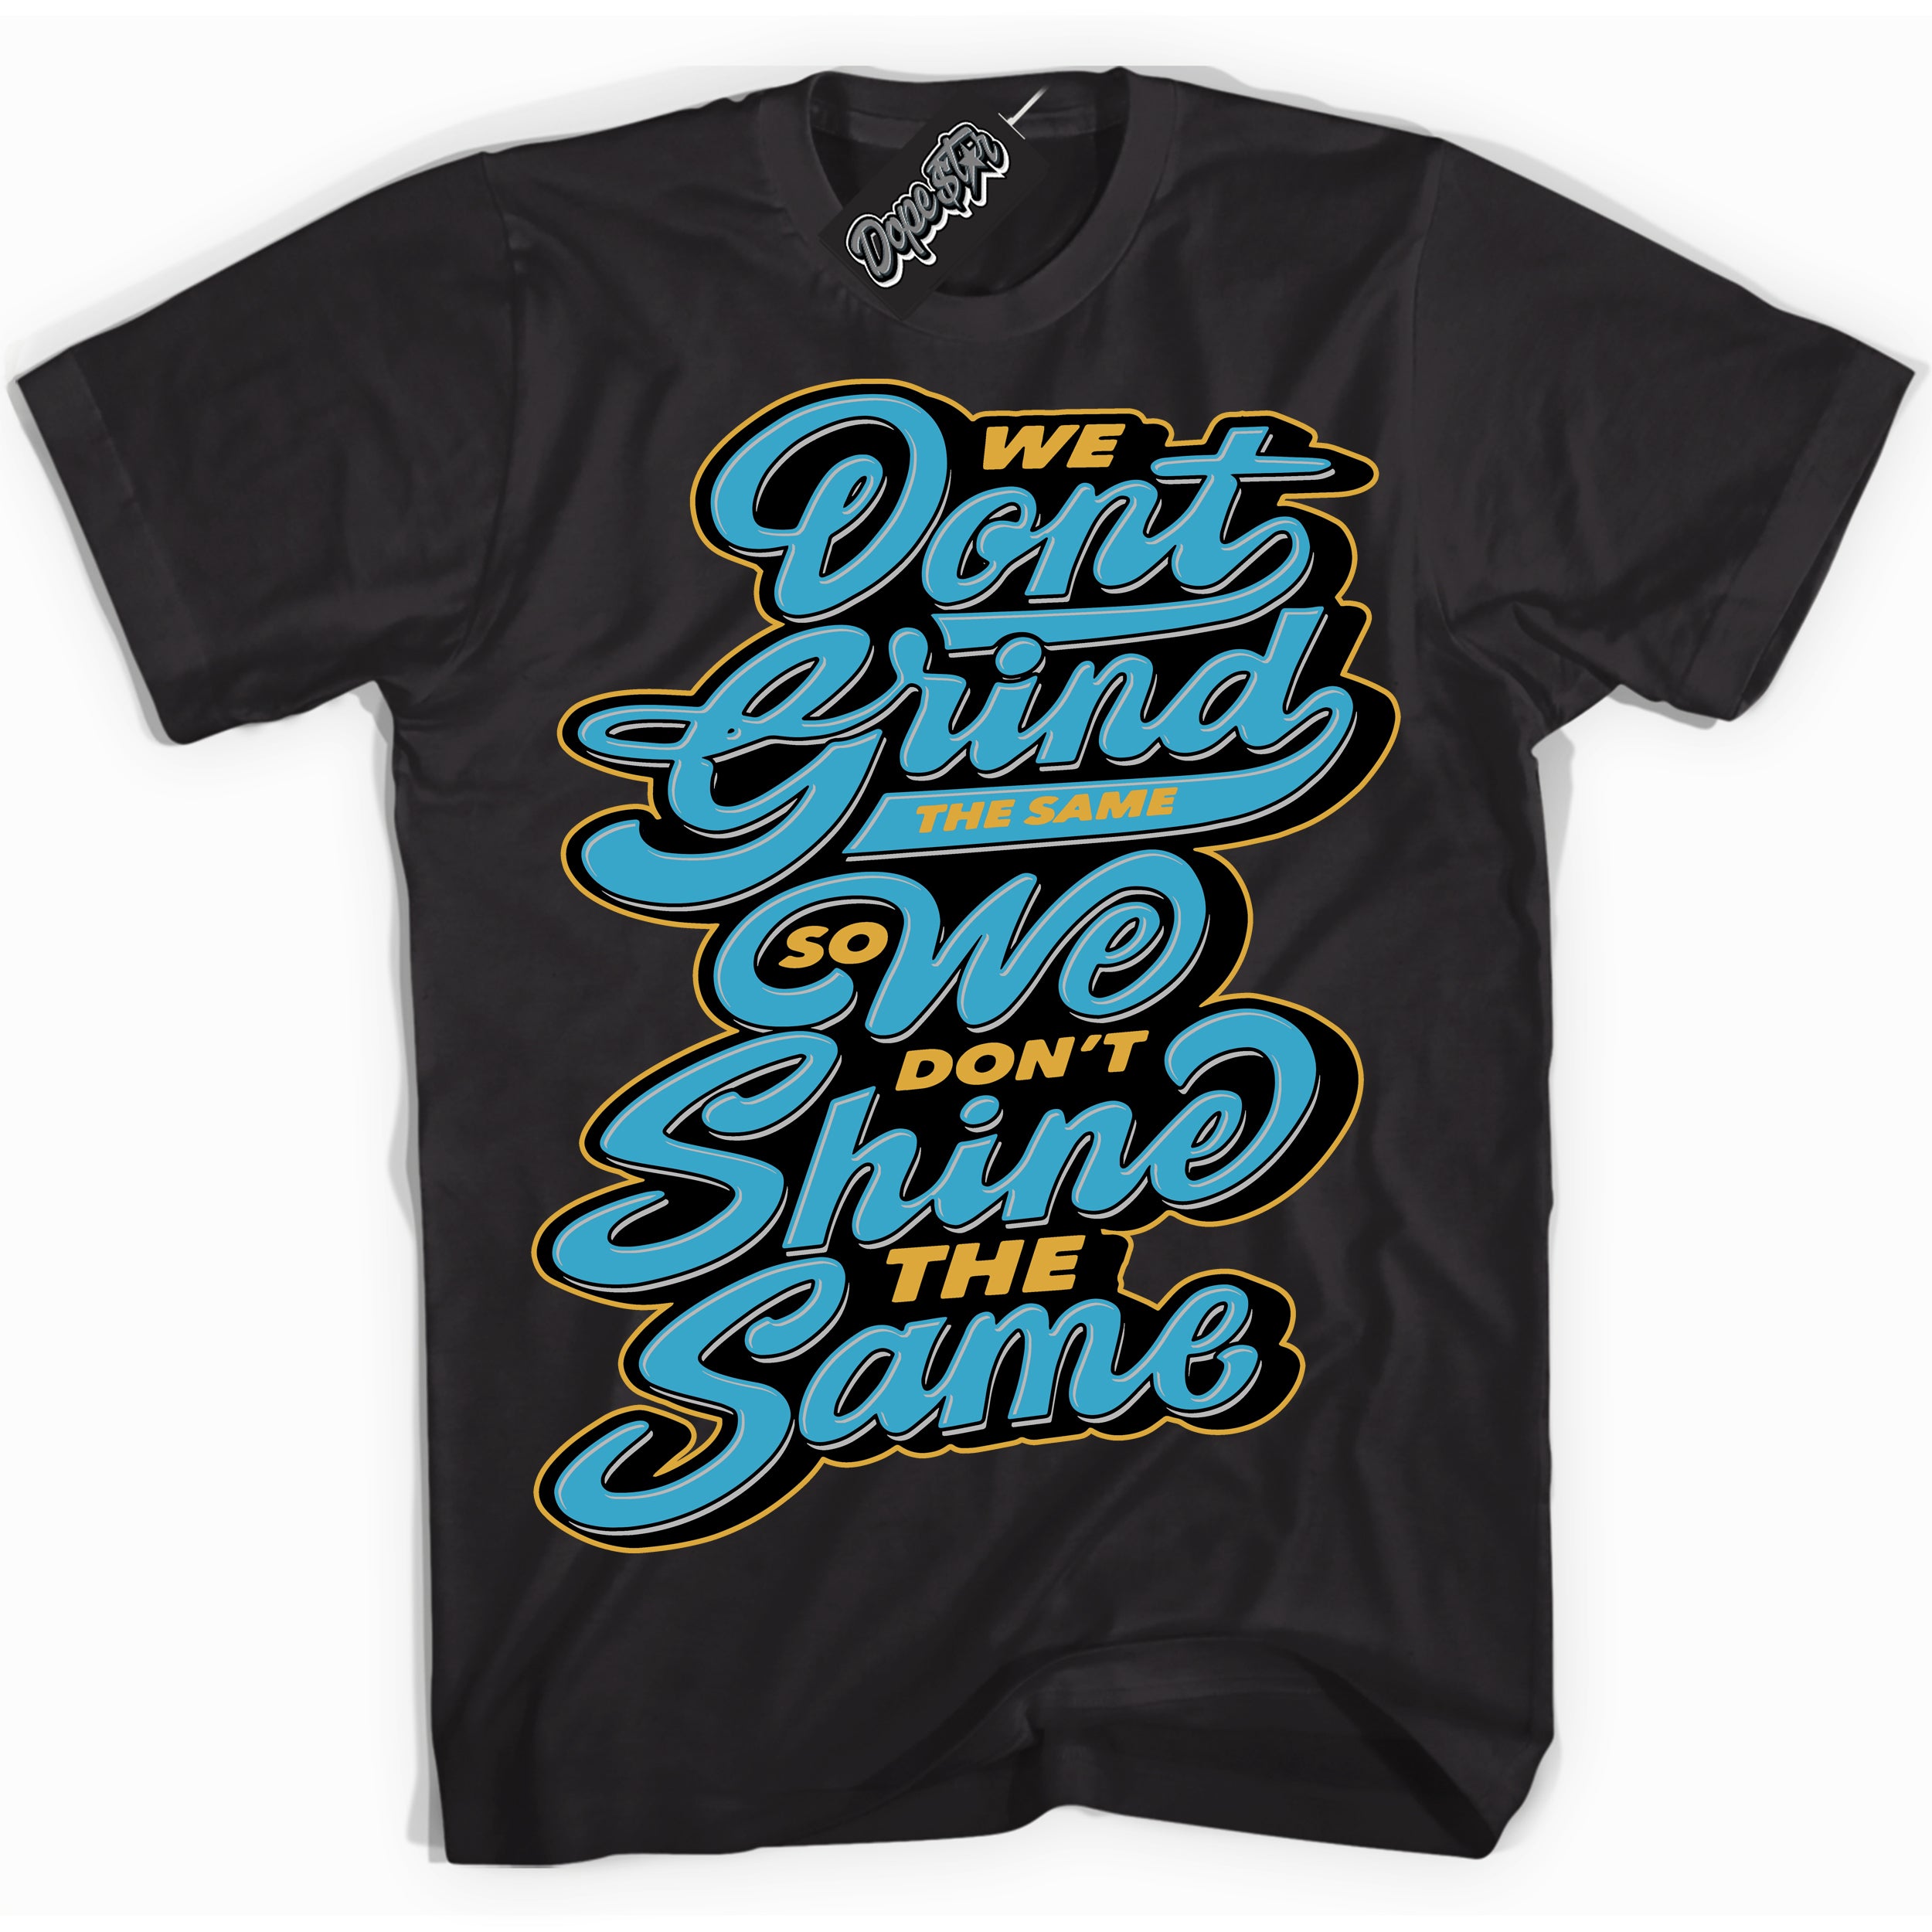 Cool Black Shirt with “ Grind Shine” design that perfectly matches Aqua 5s Sneakers.